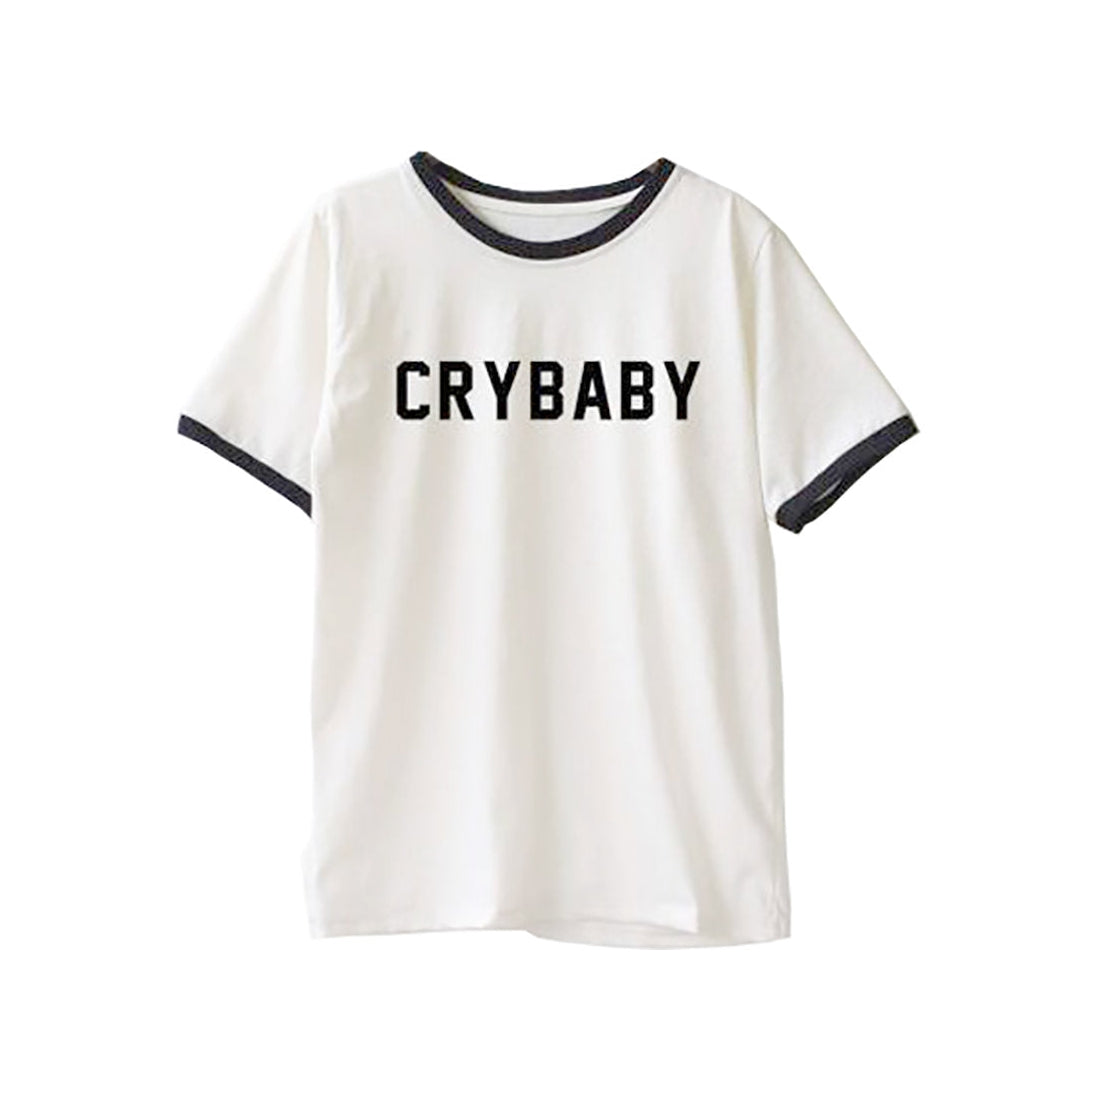 Crybaby T-Shirt-T-Shirts-streetwear-society-aesthetic-clothes